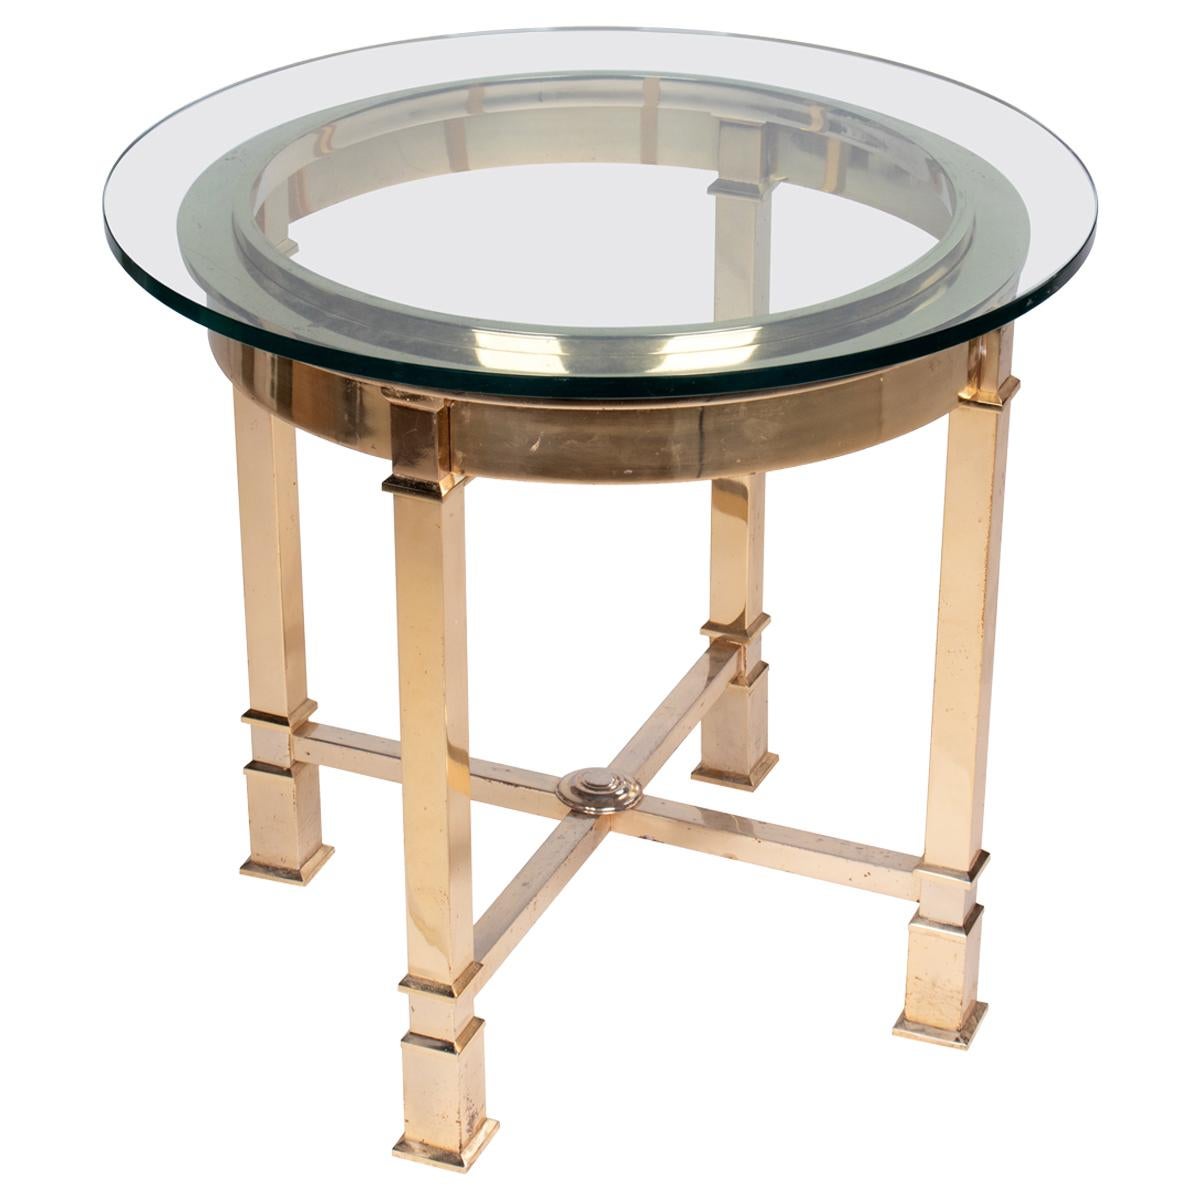 1970s Classical Italian Design Gilded Brass Round Auxiliary Table